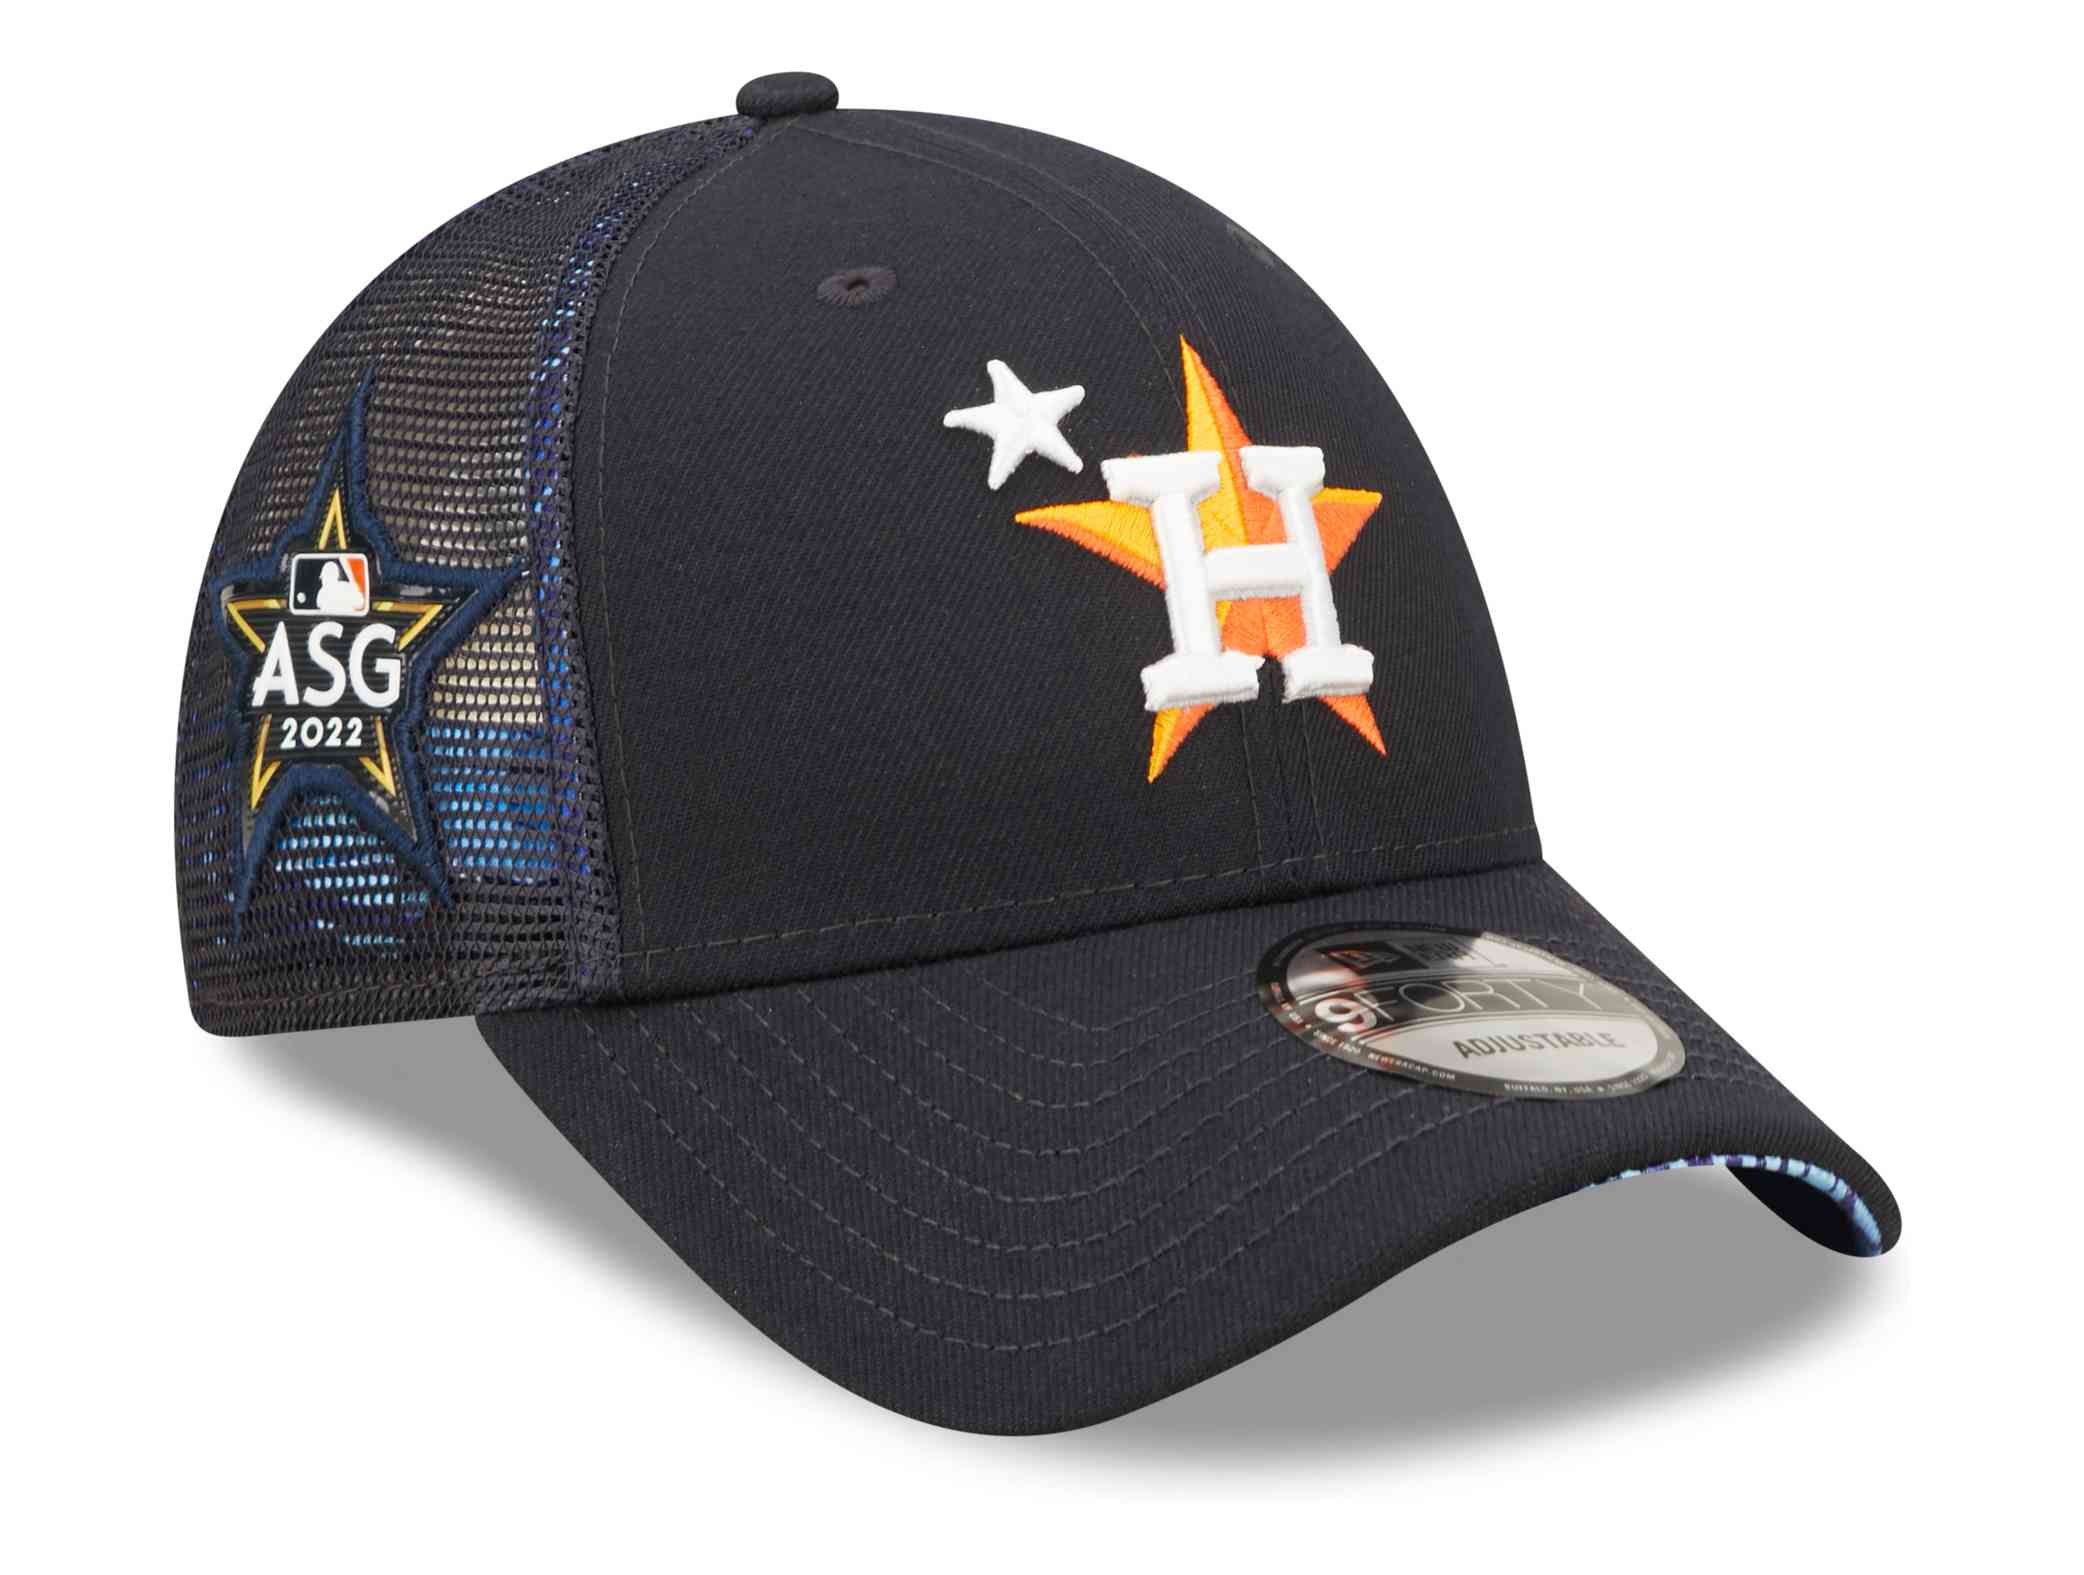 New Era - MLB Houston Astros 2022 All Star Game Workout 9Forty Snapback Cap